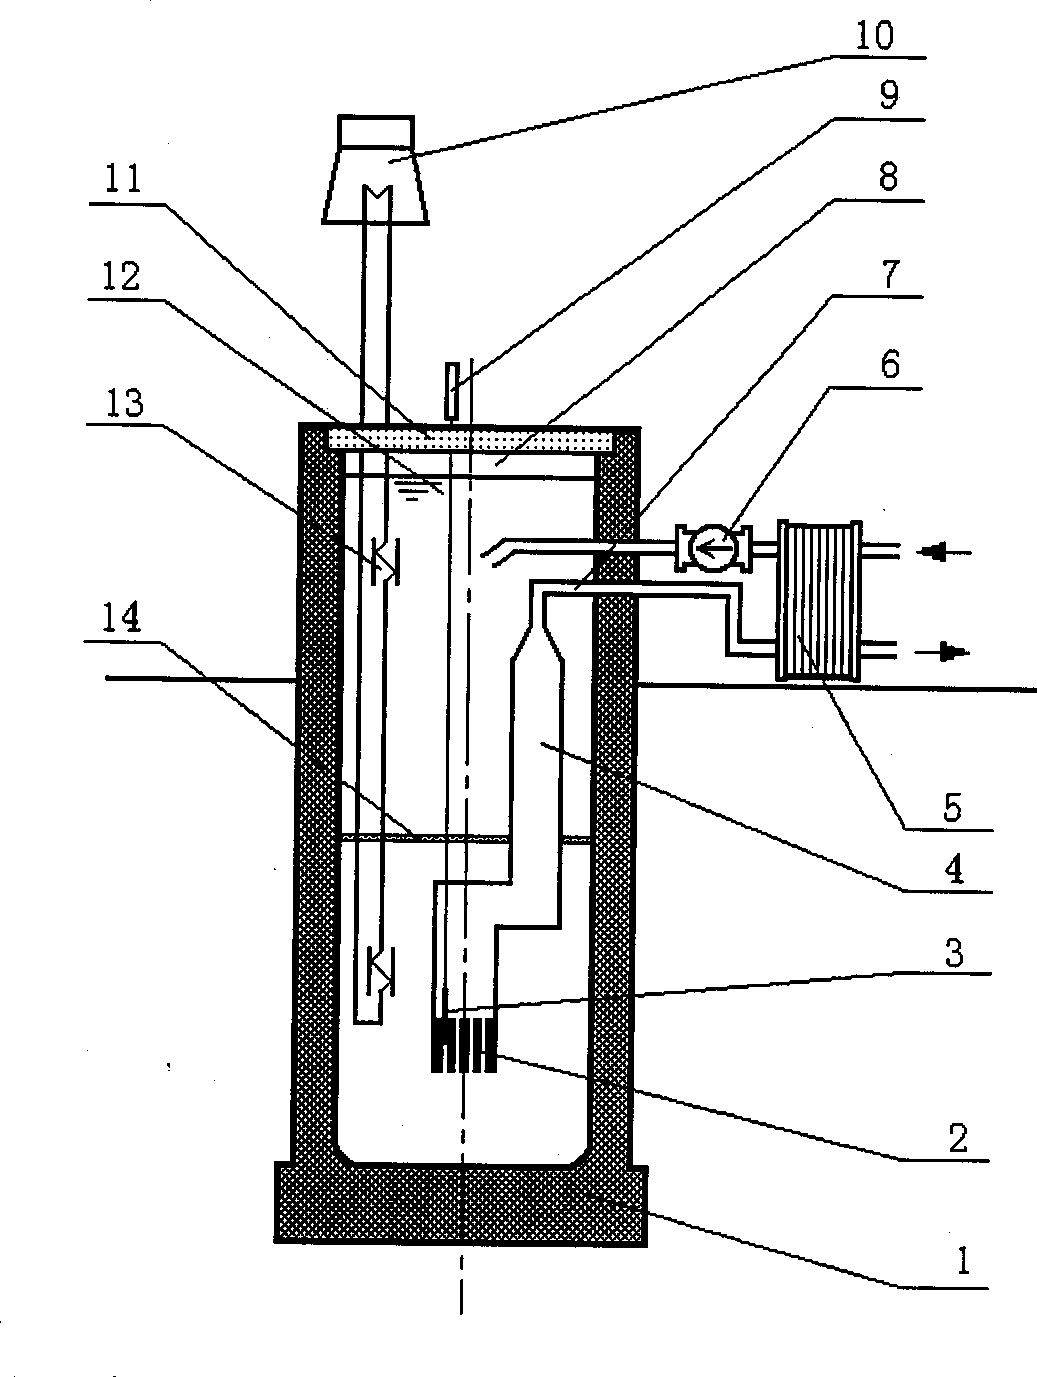 Heat supplying nuclear reactor with forced-circulation cooling deep water including natural circulation